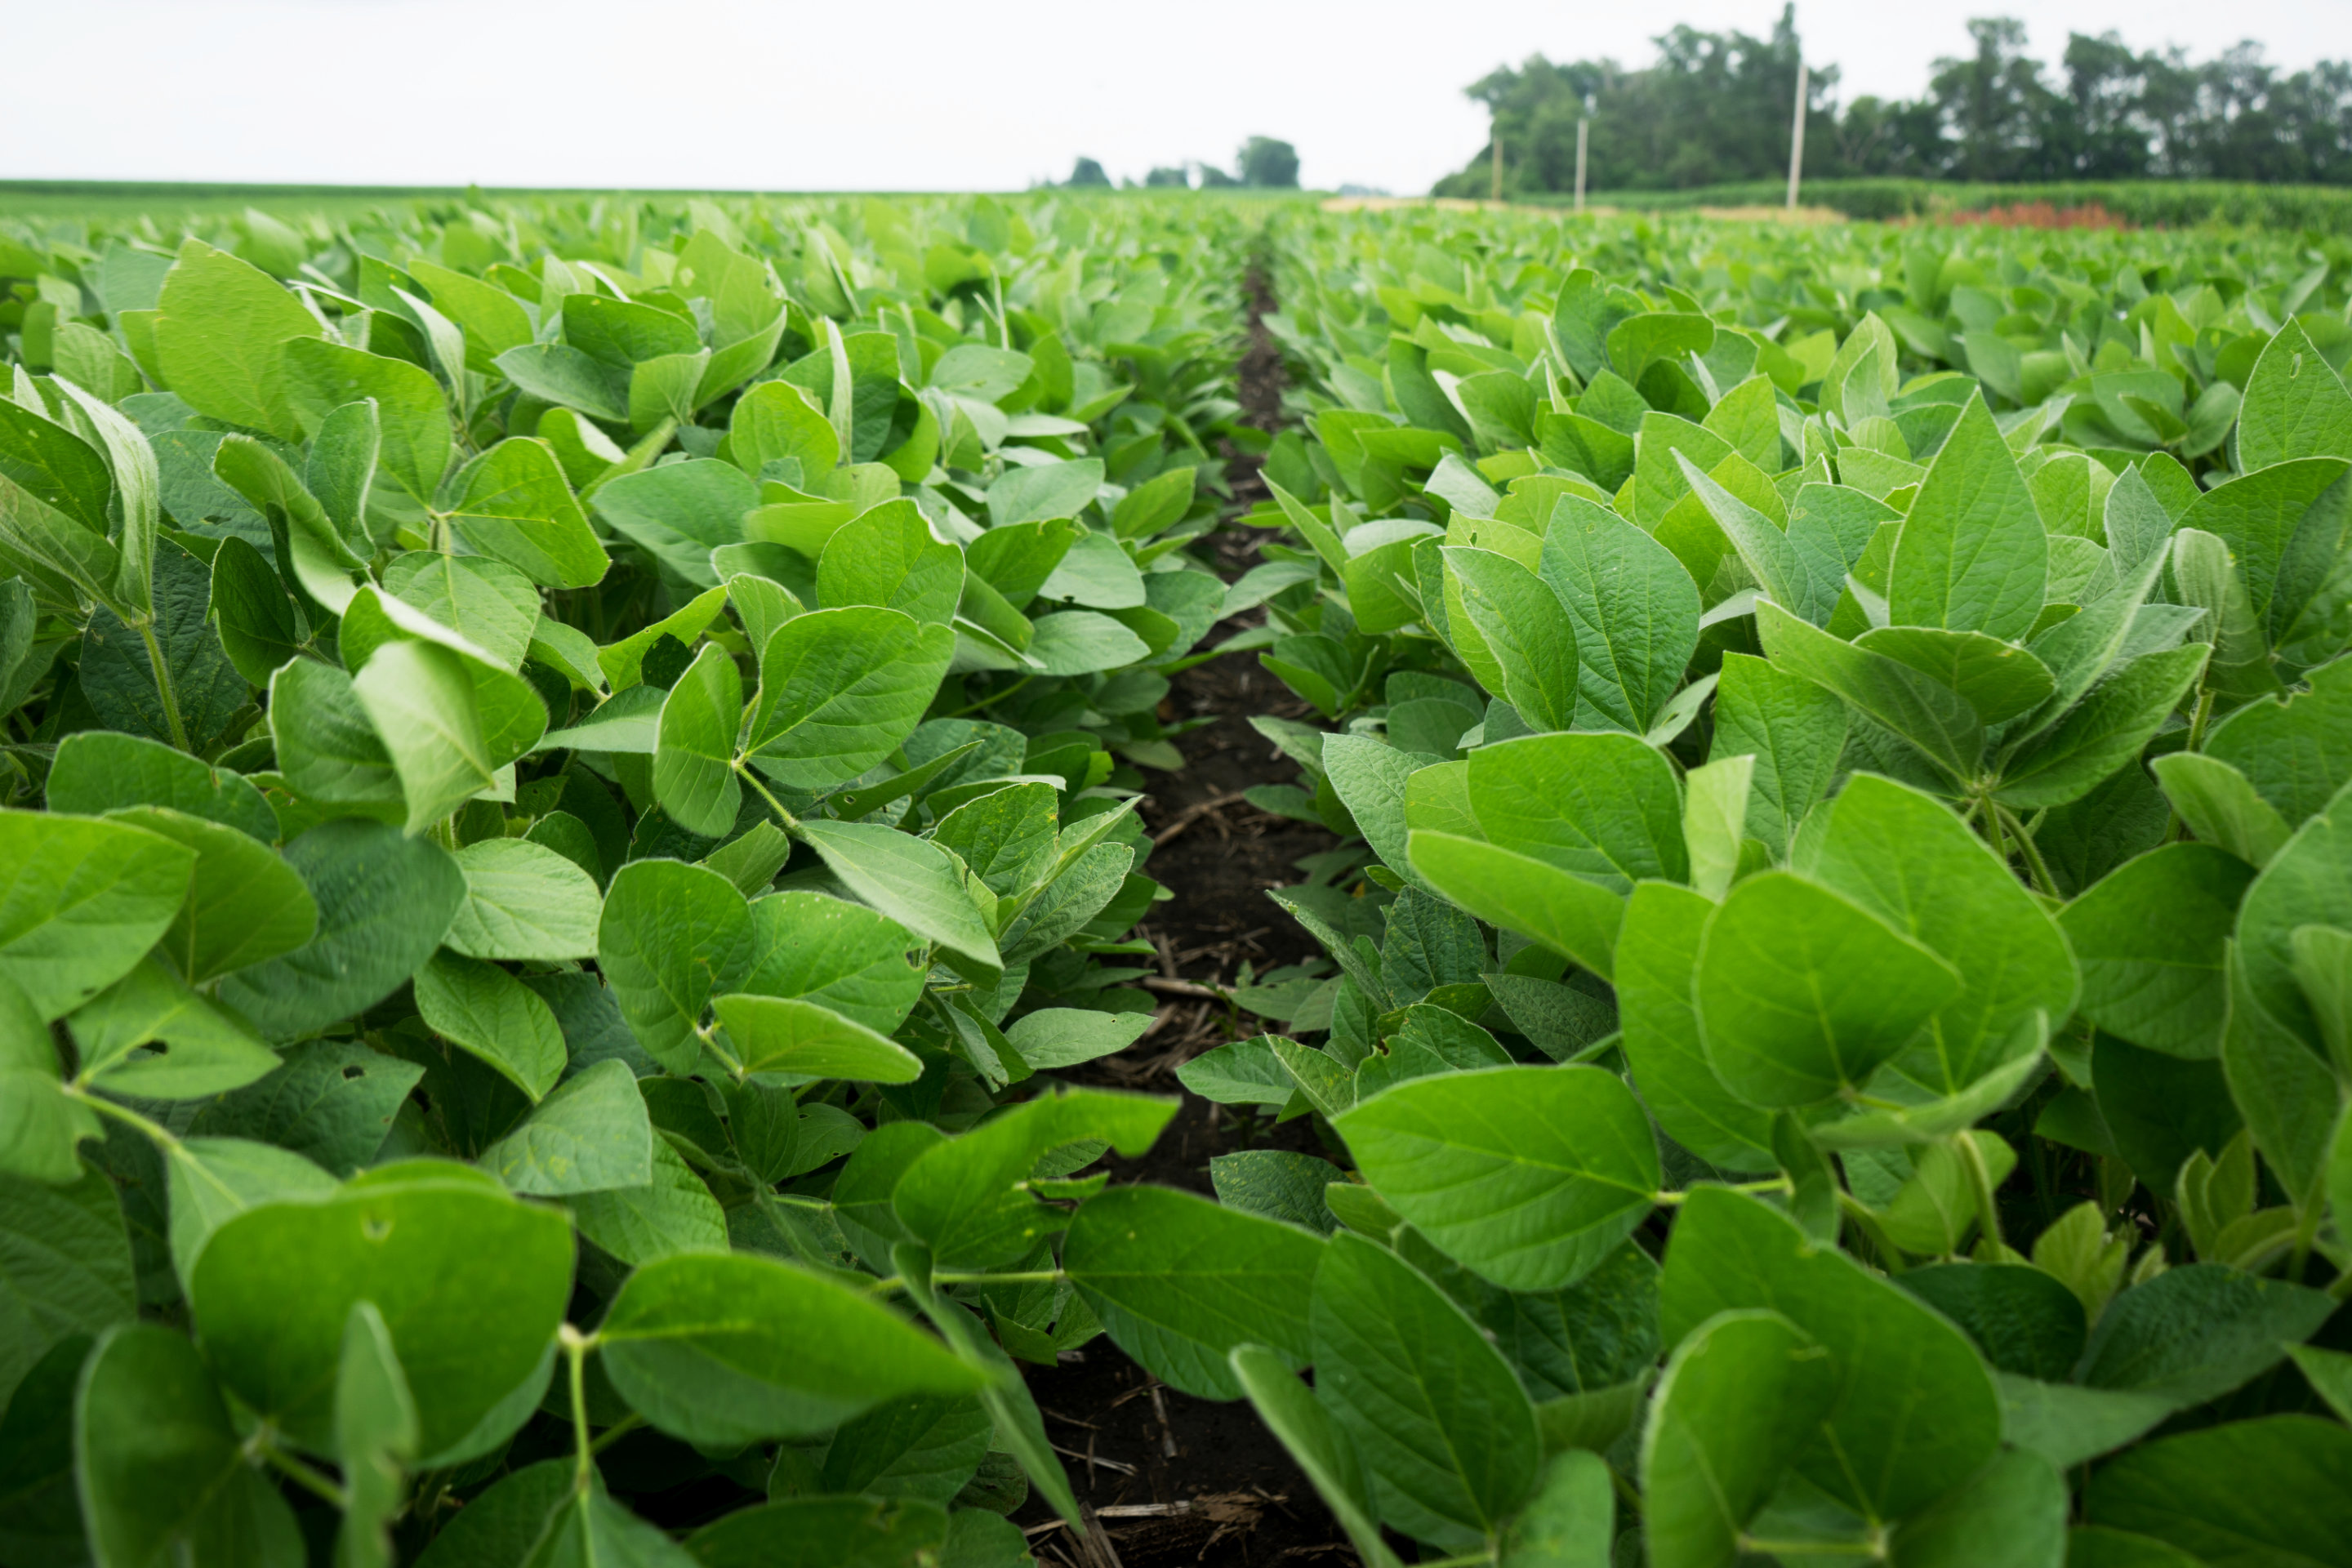 A field of young soybeans growing in rows